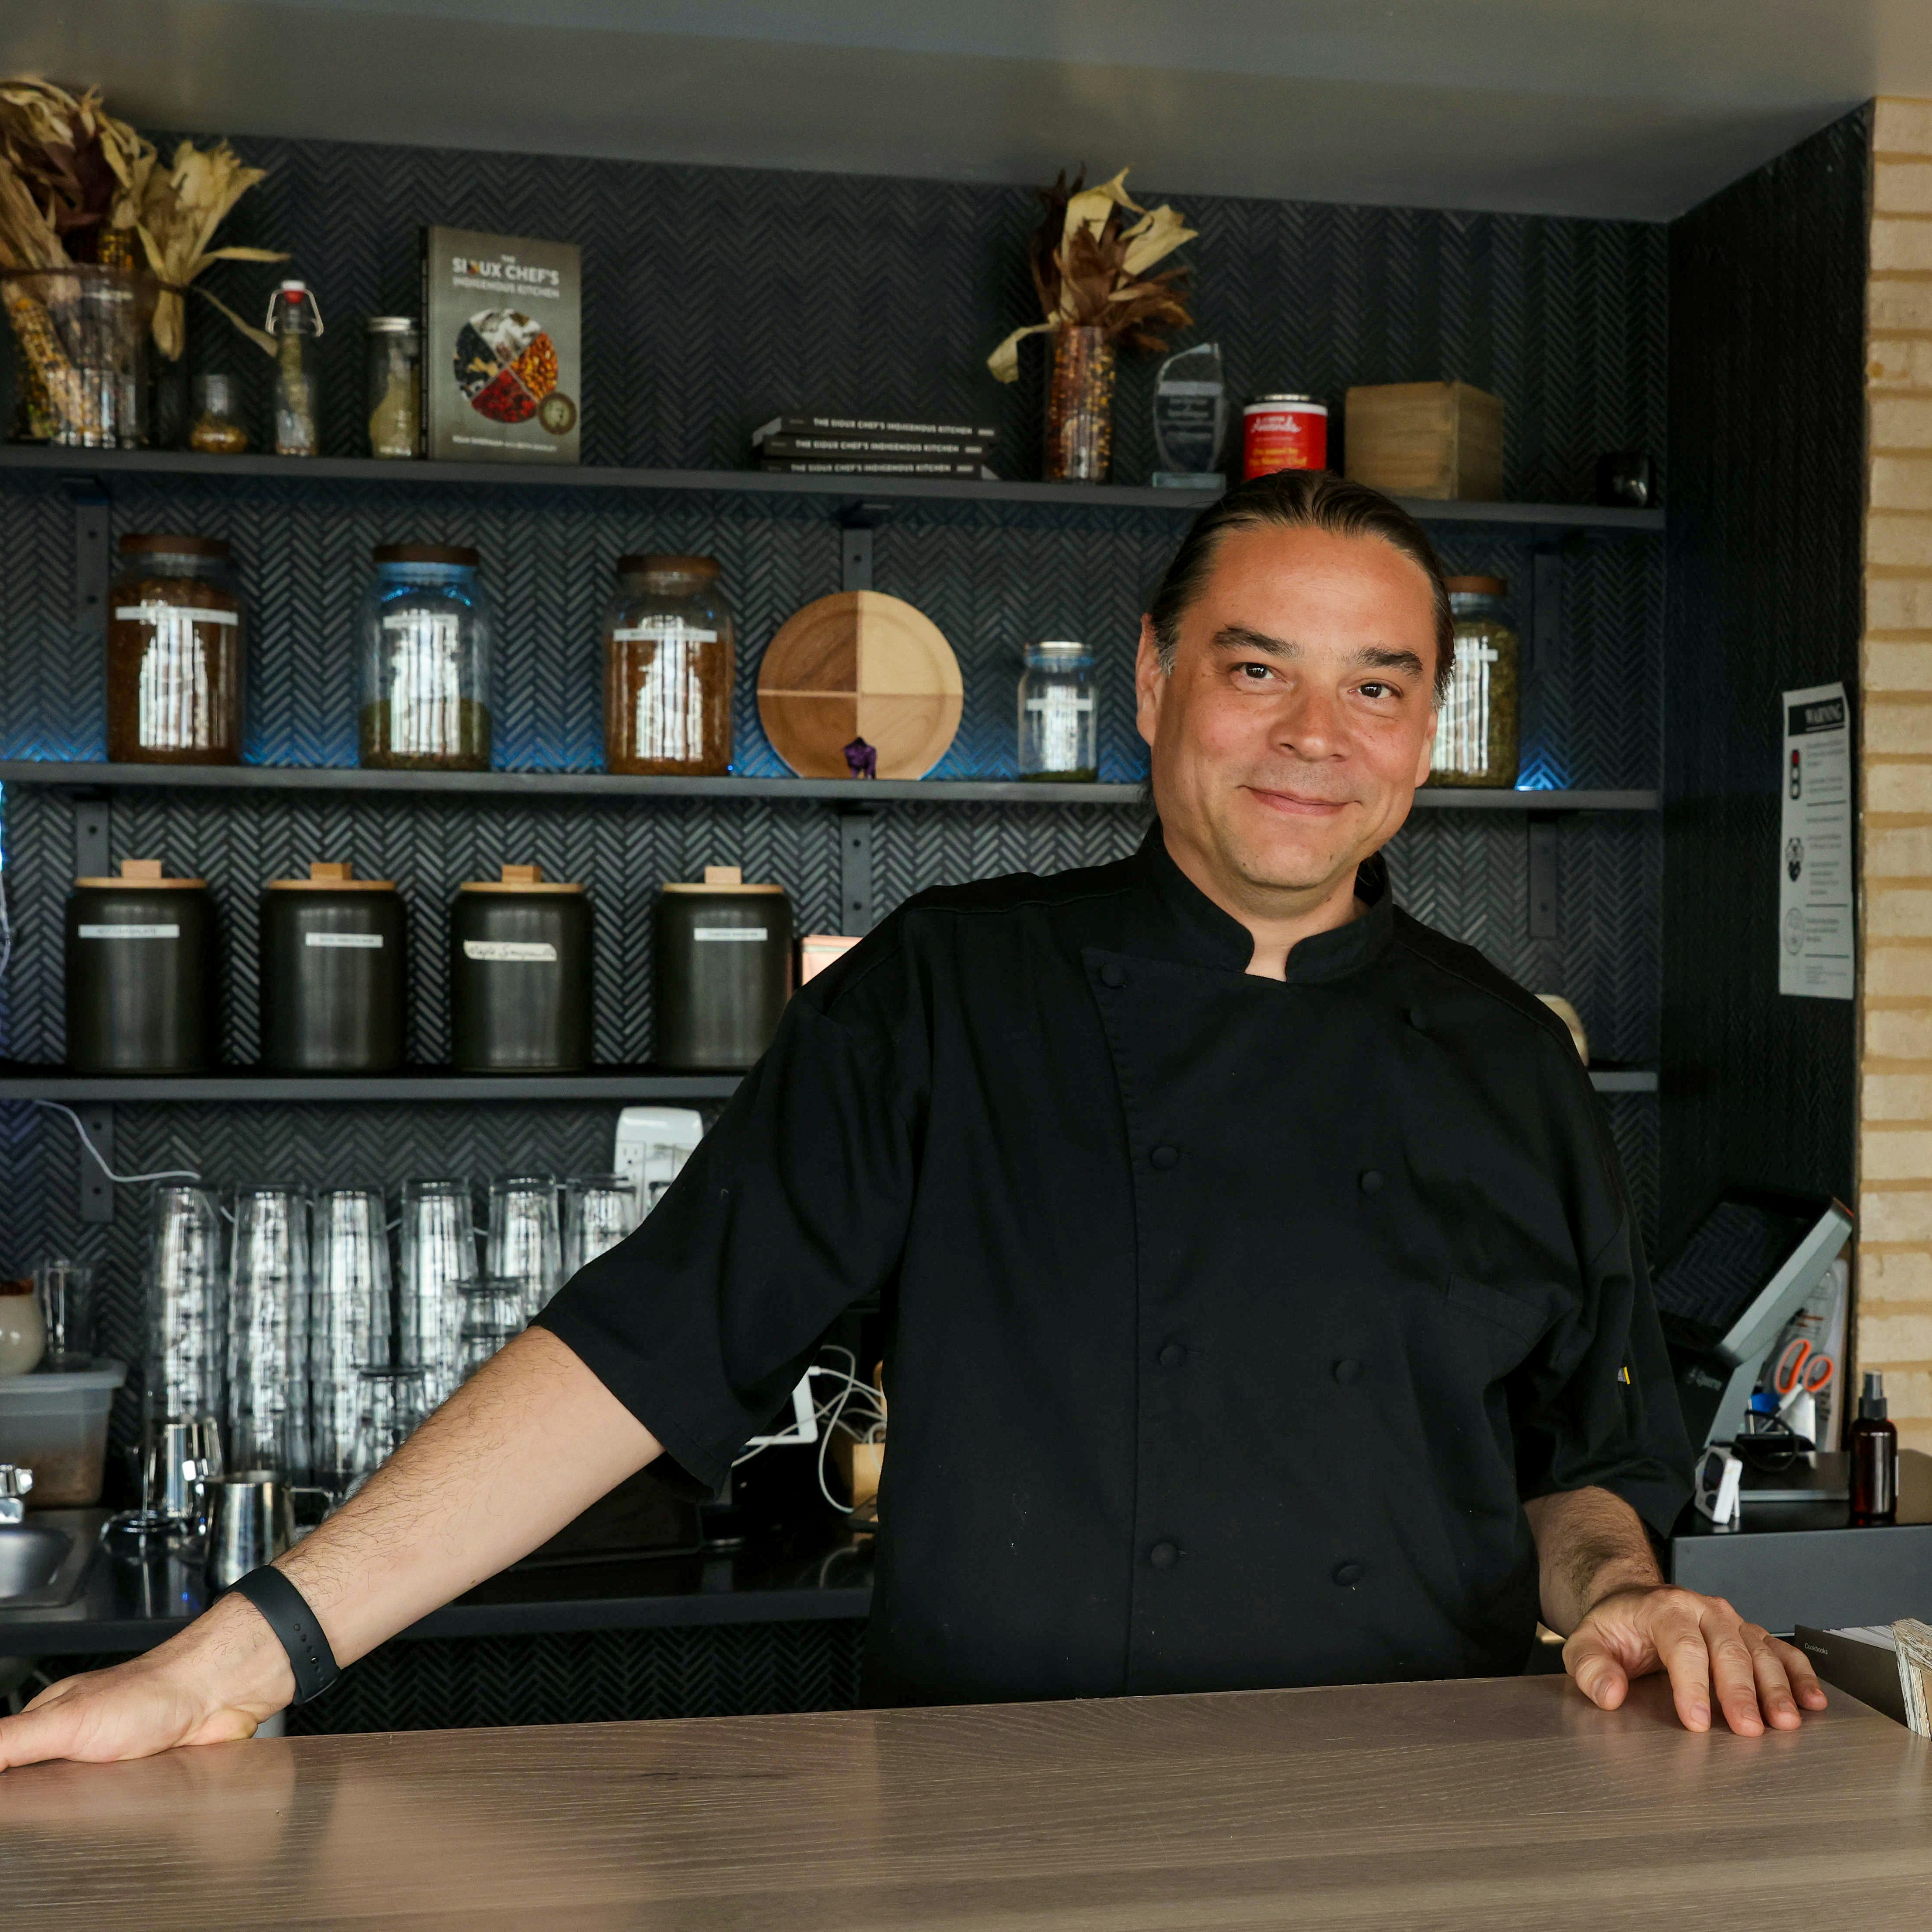 Chef and co-owner, Sean Sherman at front desk of  Owamni.